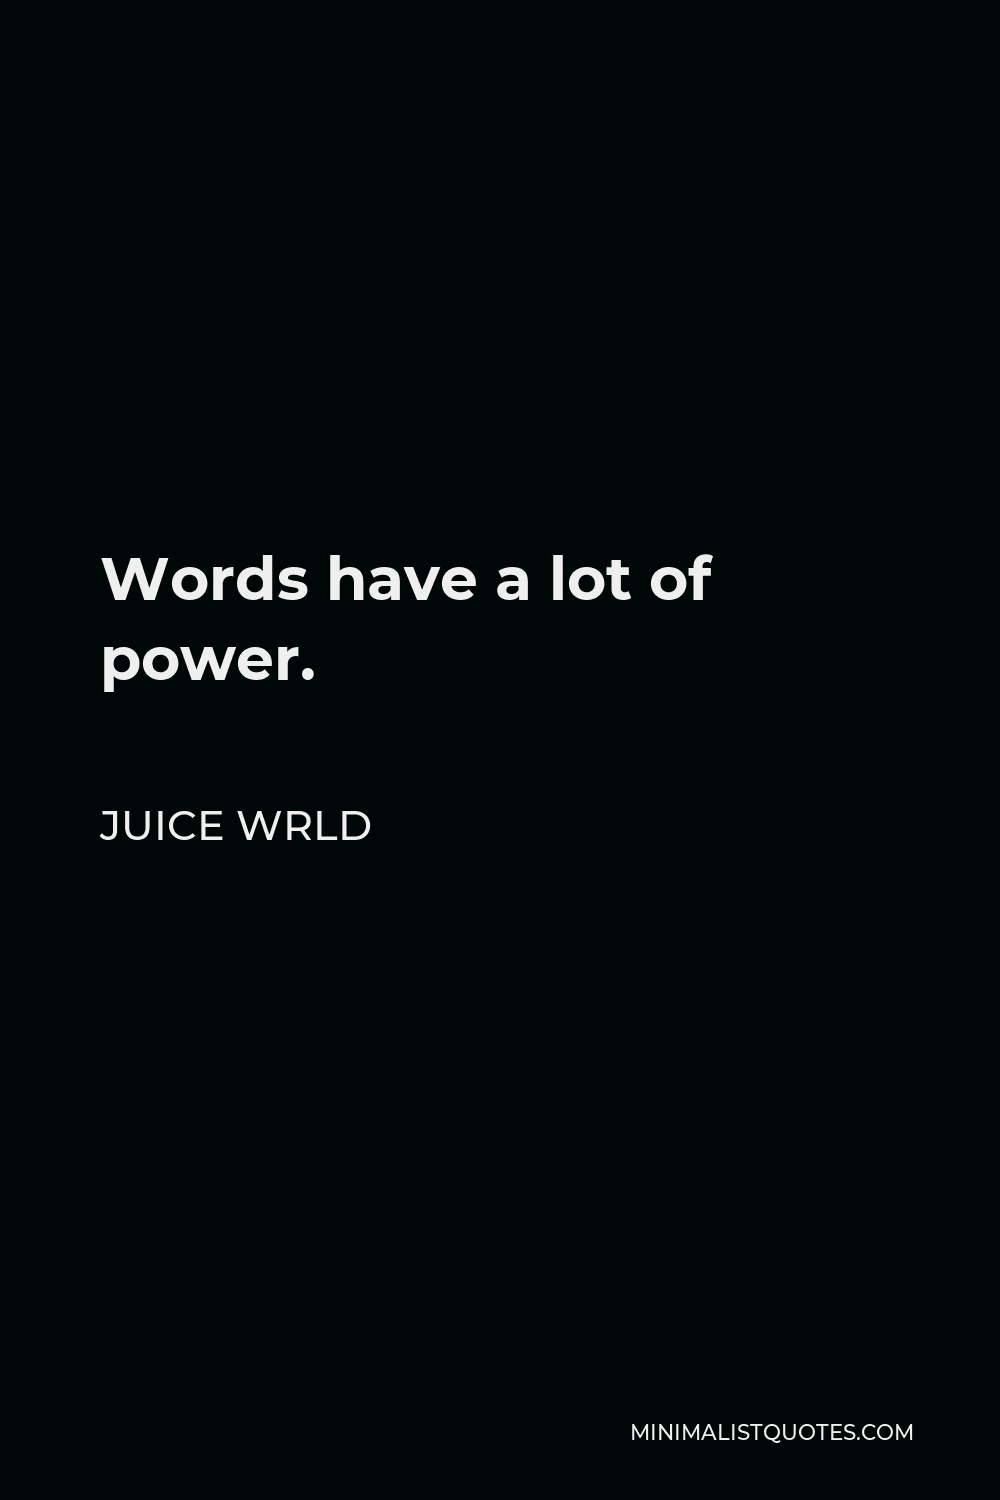 Juice Wrld Quote - Words have a lot of power.